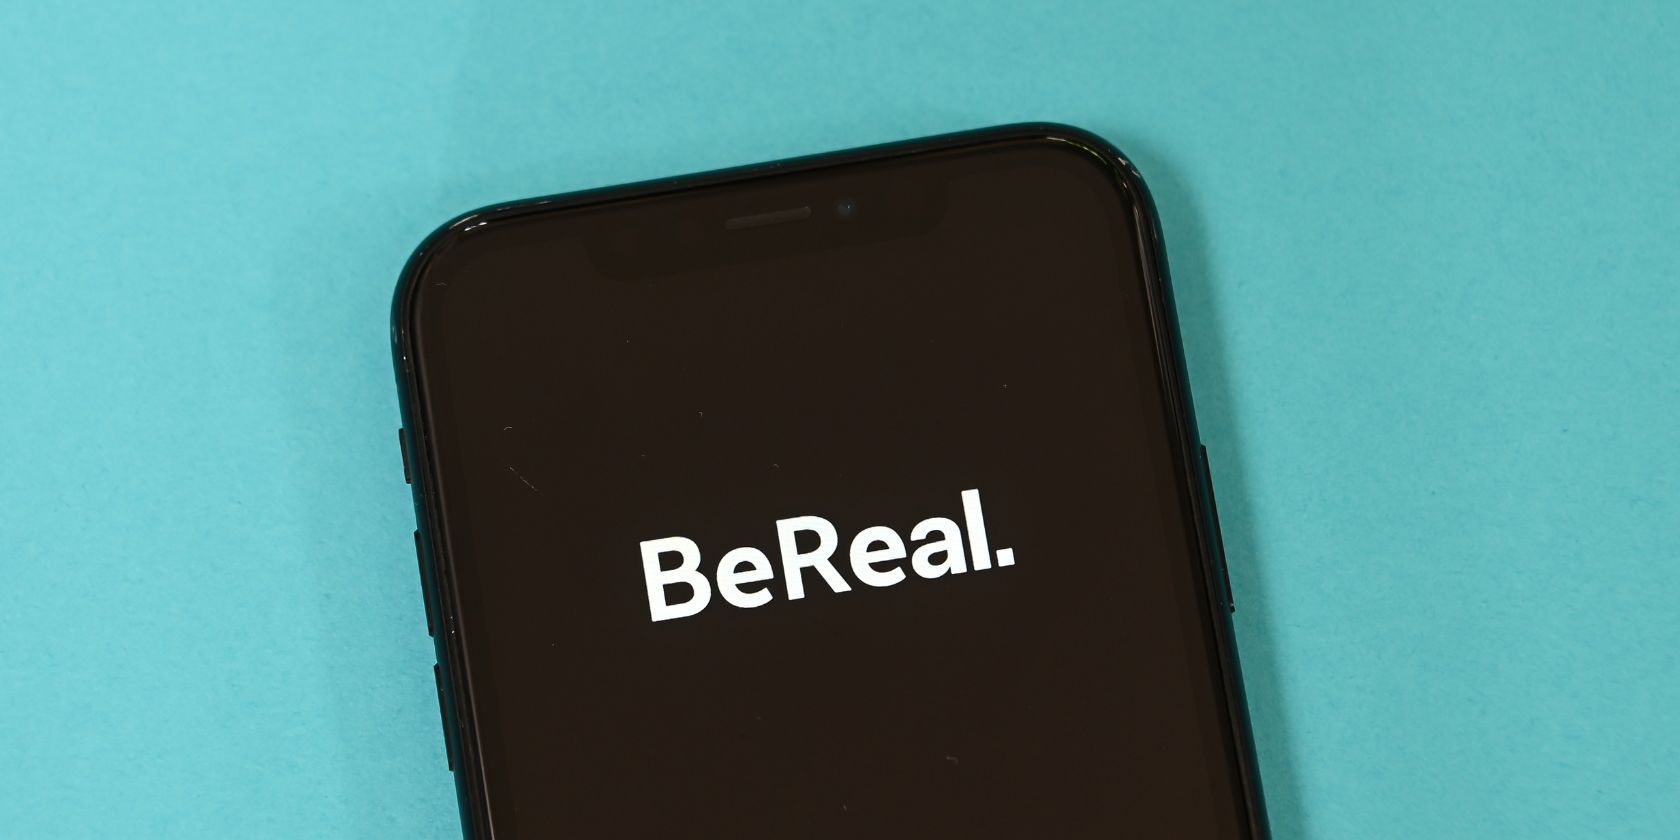 the bereal logo on a smartphone